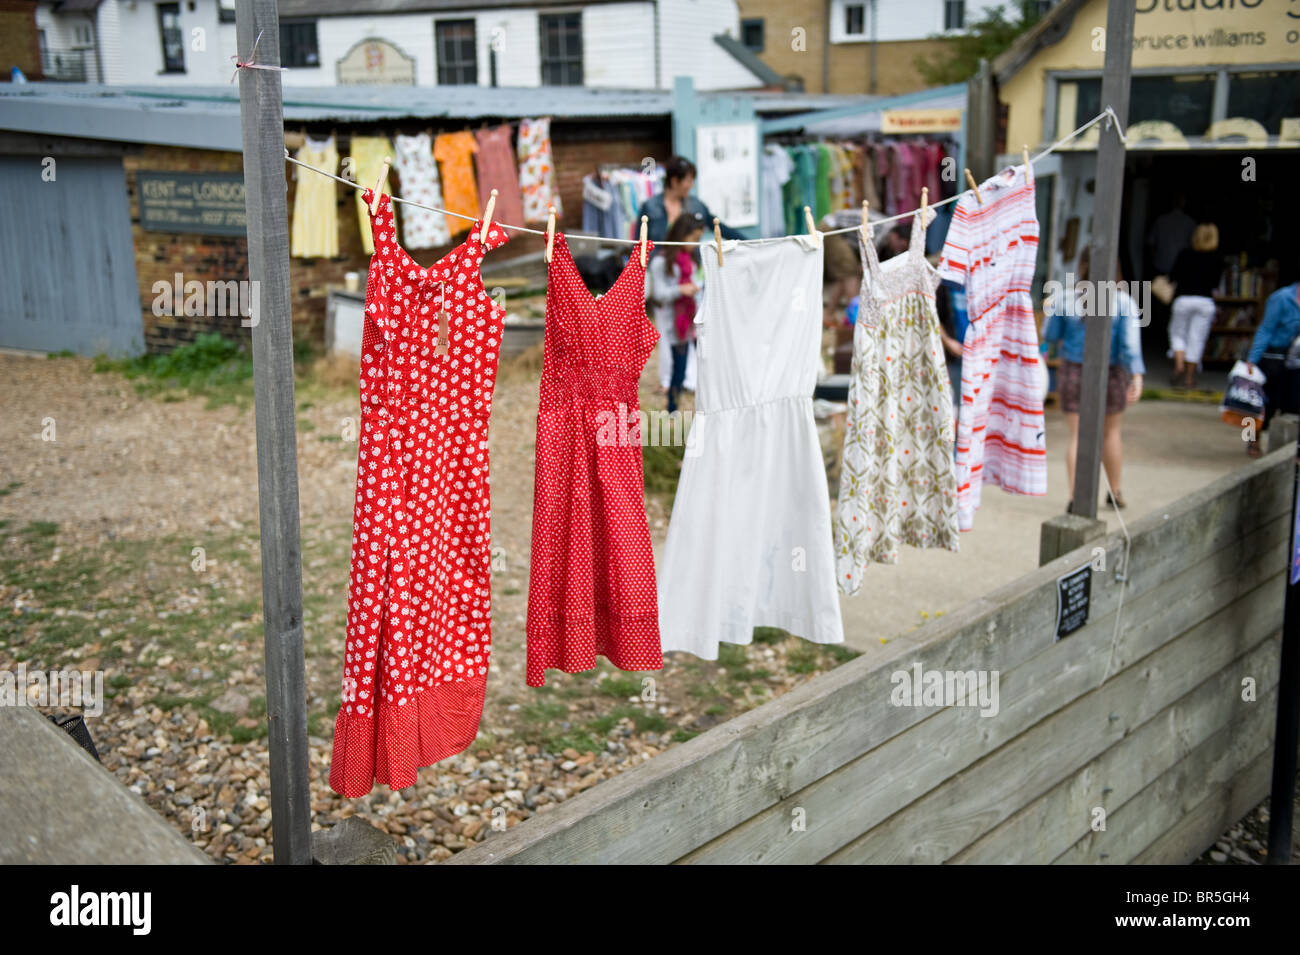 A washing line displaying second hand vintage dresses for sale